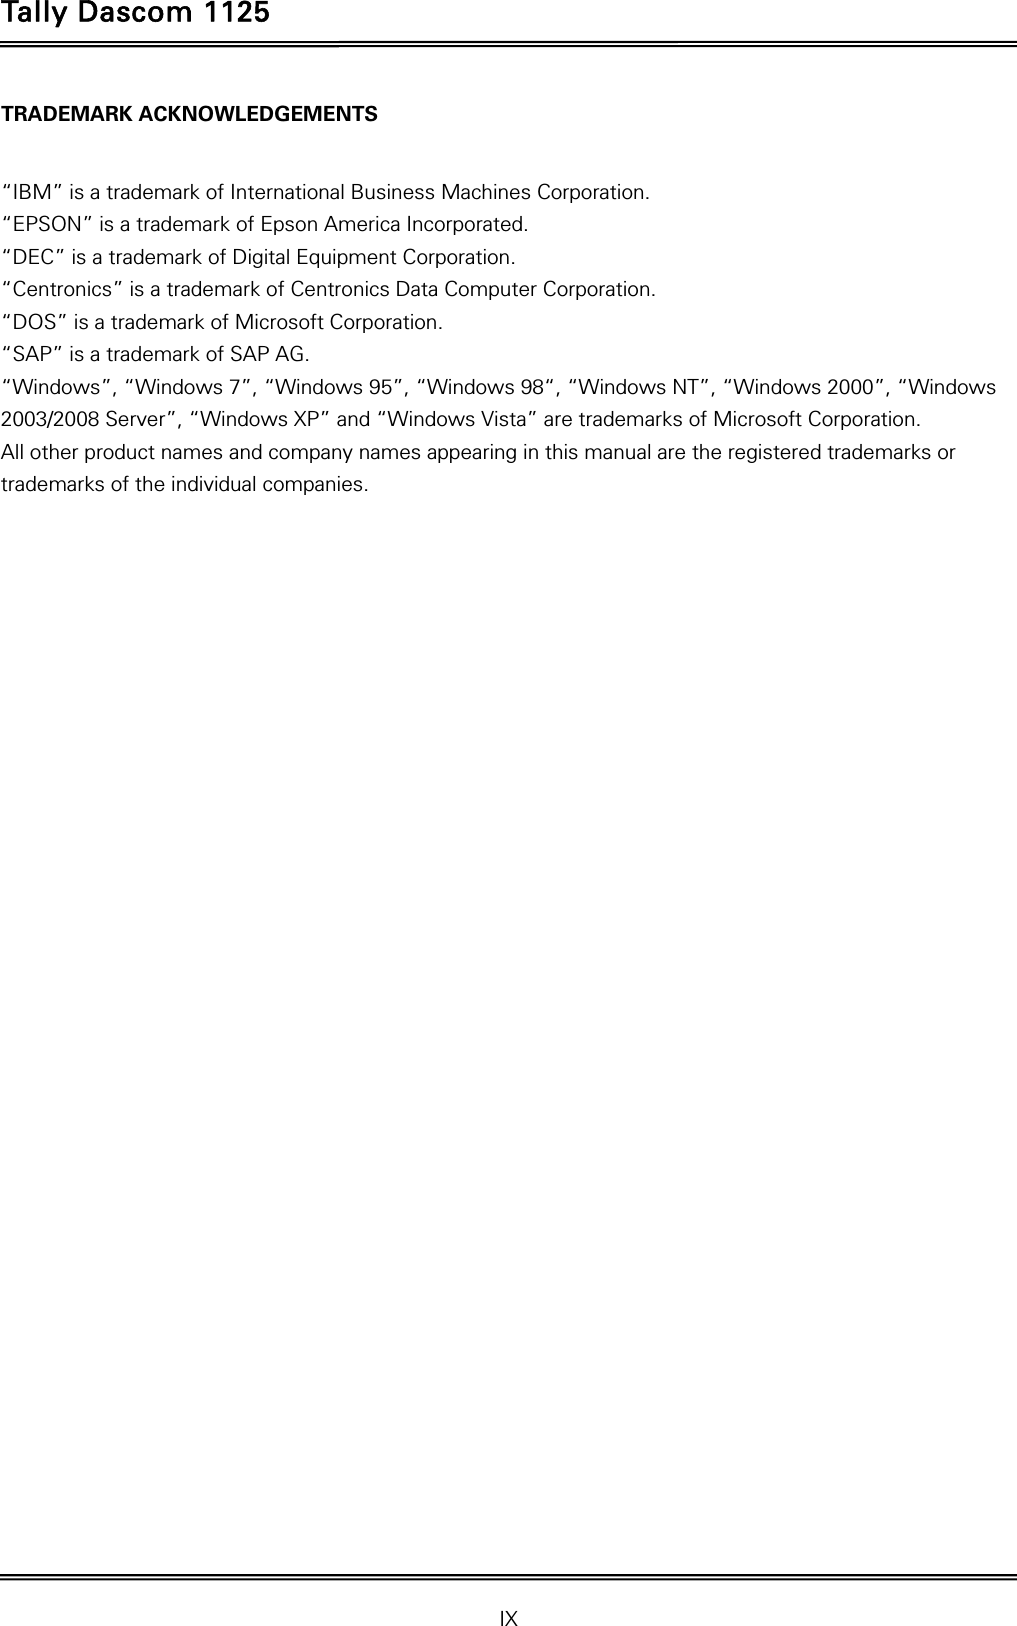 Tally Dascom 1125  IX  TRADEMARK ACKNOWLEDGEMENTS  “IBM” is a trademark of International Business Machines Corporation. “EPSON” is a trademark of Epson America Incorporated. “DEC” is a trademark of Digital Equipment Corporation. “Centronics” is a trademark of Centronics Data Computer Corporation. “DOS” is a trademark of Microsoft Corporation. “SAP” is a trademark of SAP AG. “Windows”, “Windows 7”, “Windows 95”, “Windows 98“, “Windows NT”, “Windows 2000”, “Windows 2003/2008 Server”, “Windows XP” and “Windows Vista” are trademarks of Microsoft Corporation. All other product names and company names appearing in this manual are the registered trademarks or trademarks of the individual companies.  